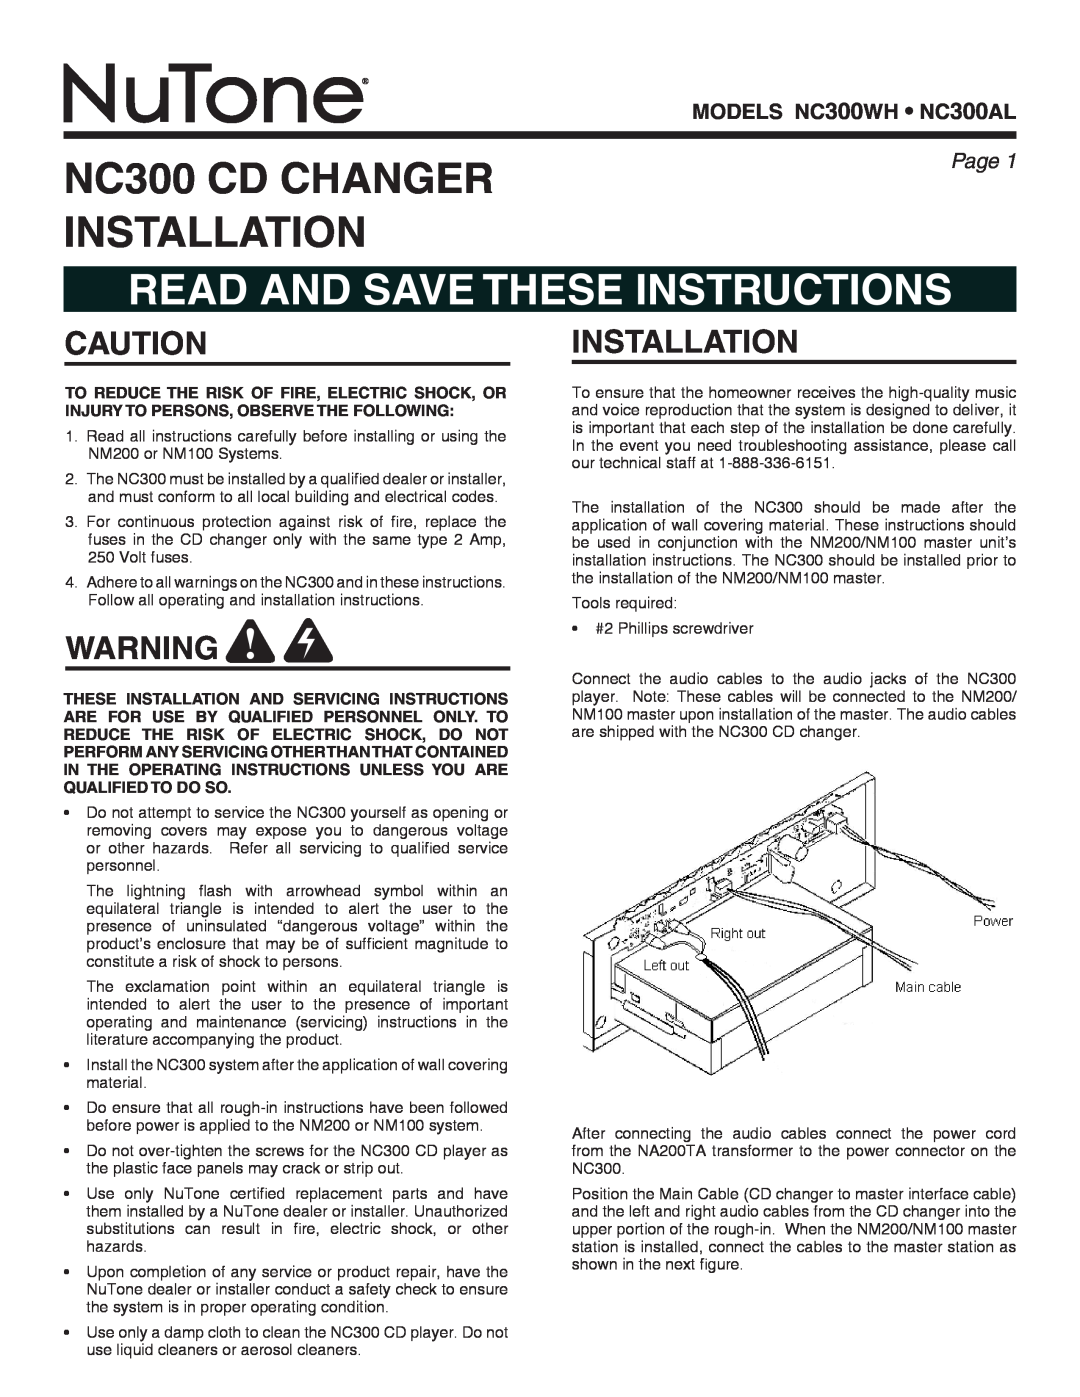 NuTone NC300AL installation instructions models nc300wh nc300al, nC300 cd changer, read and save these instructions 